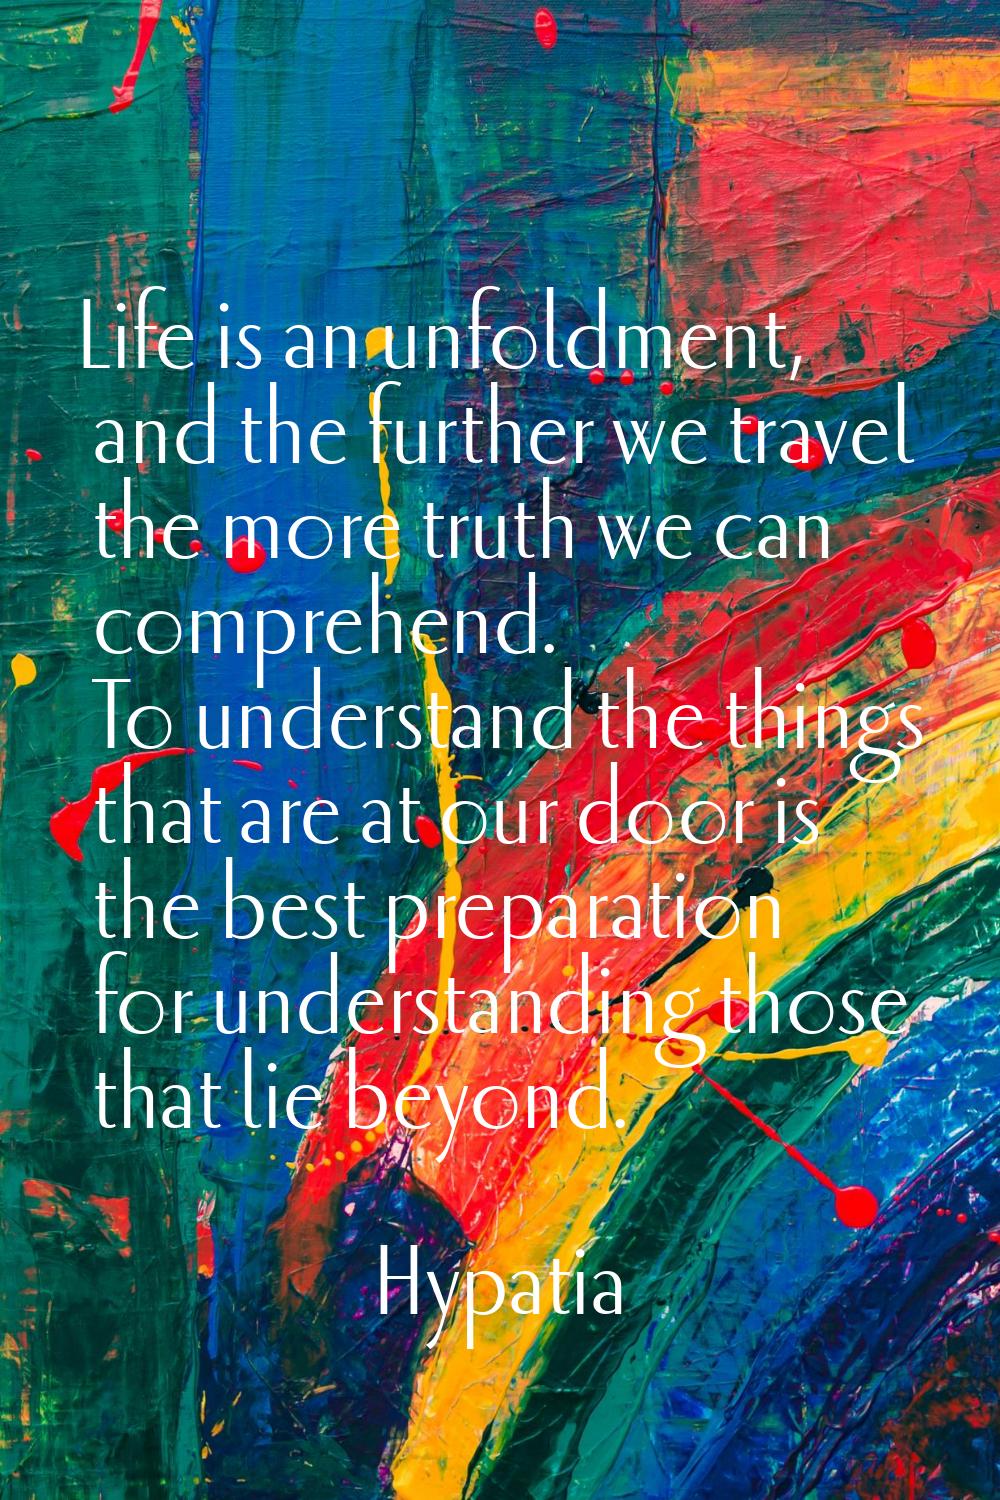 Life is an unfoldment, and the further we travel the more truth we can comprehend. To understand th